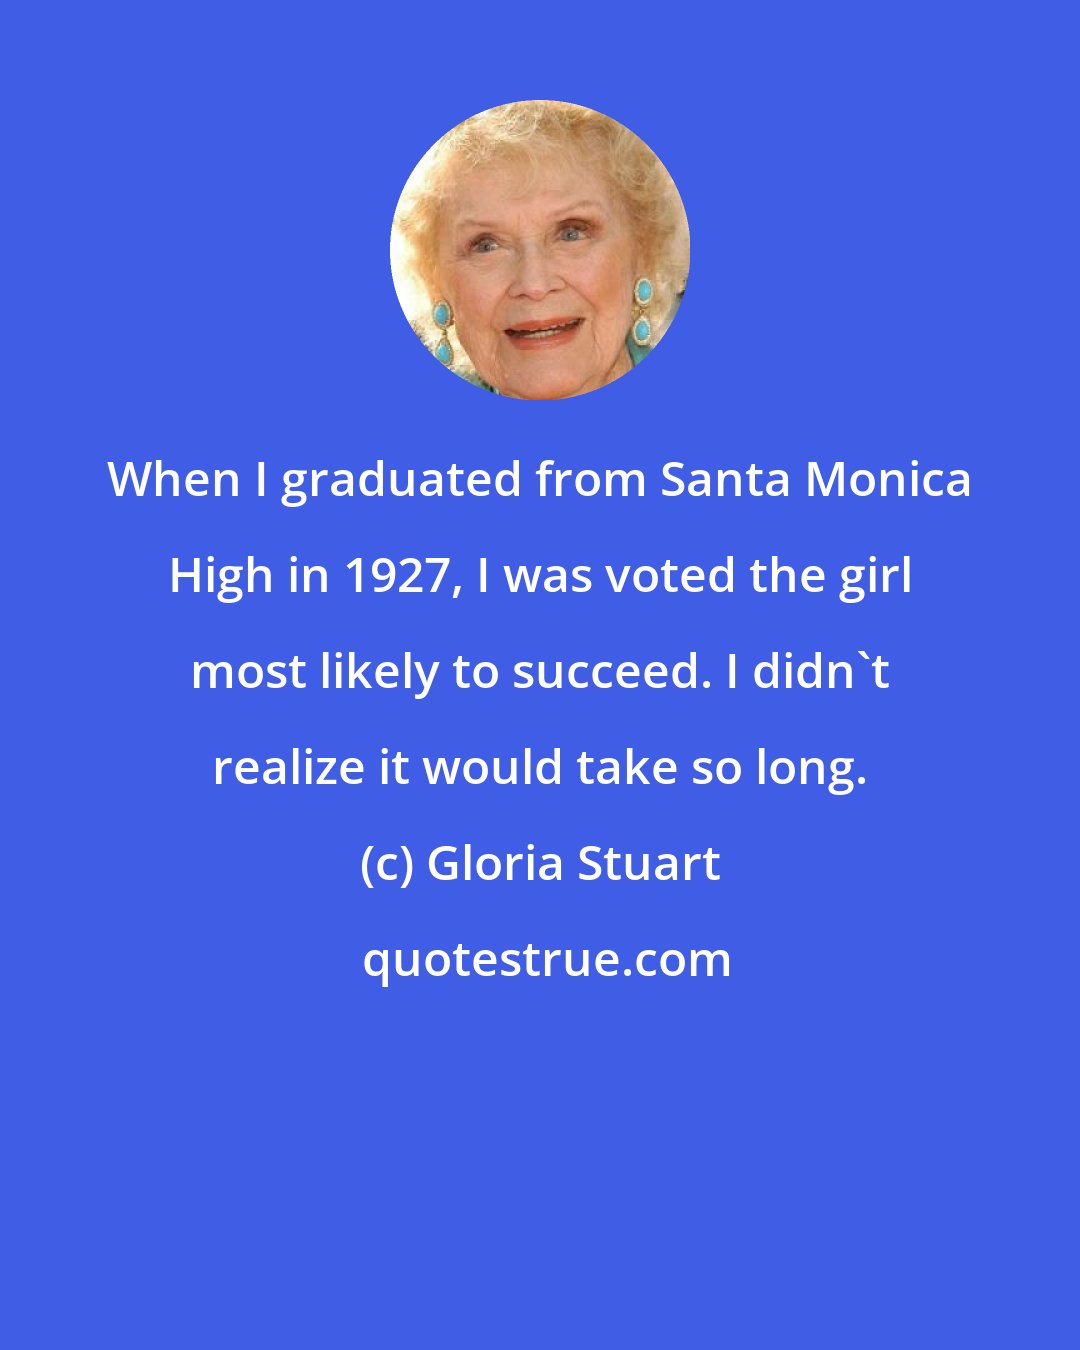 Gloria Stuart: When I graduated from Santa Monica High in 1927, I was voted the girl most likely to succeed. I didn't realize it would take so long.